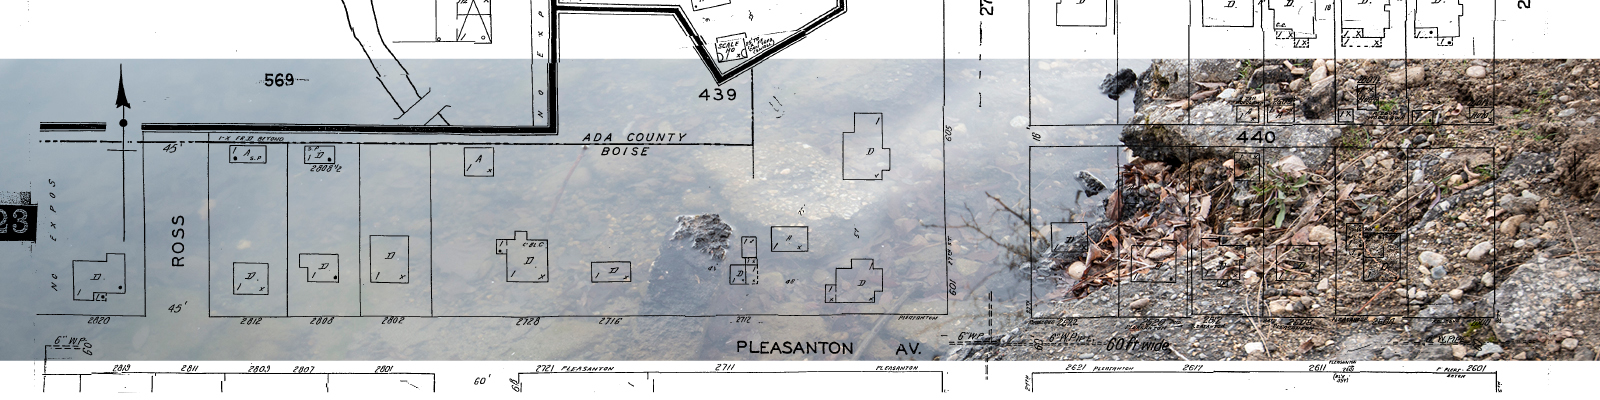 Historic map graphic on photograph of old broken concrete in the Boise River